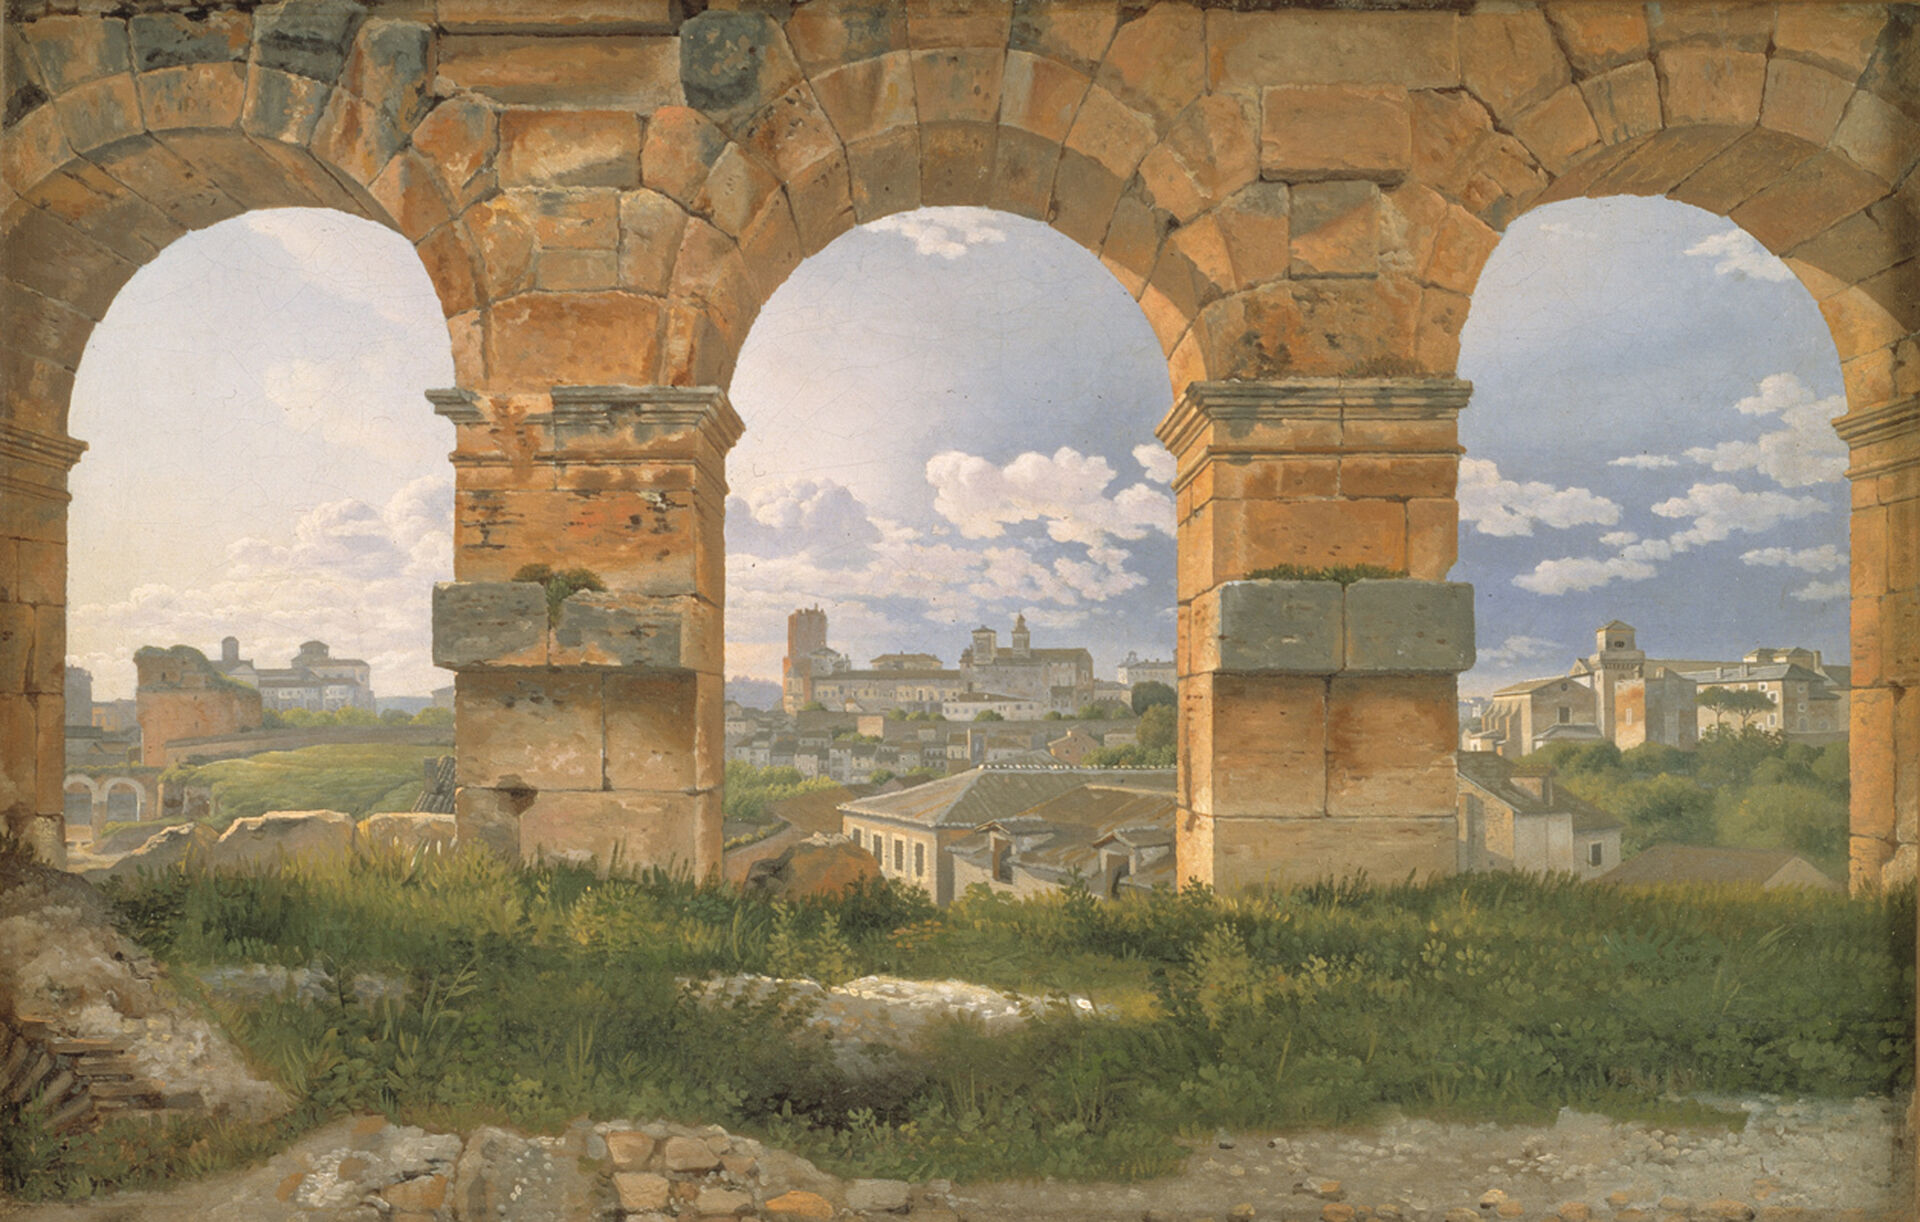 Christoffer Wilhelm Eckersberg, A View through Three Arches of the Third Storey of the Colosseum, 1815. Oil on canvas. The National Gallery of Denmark